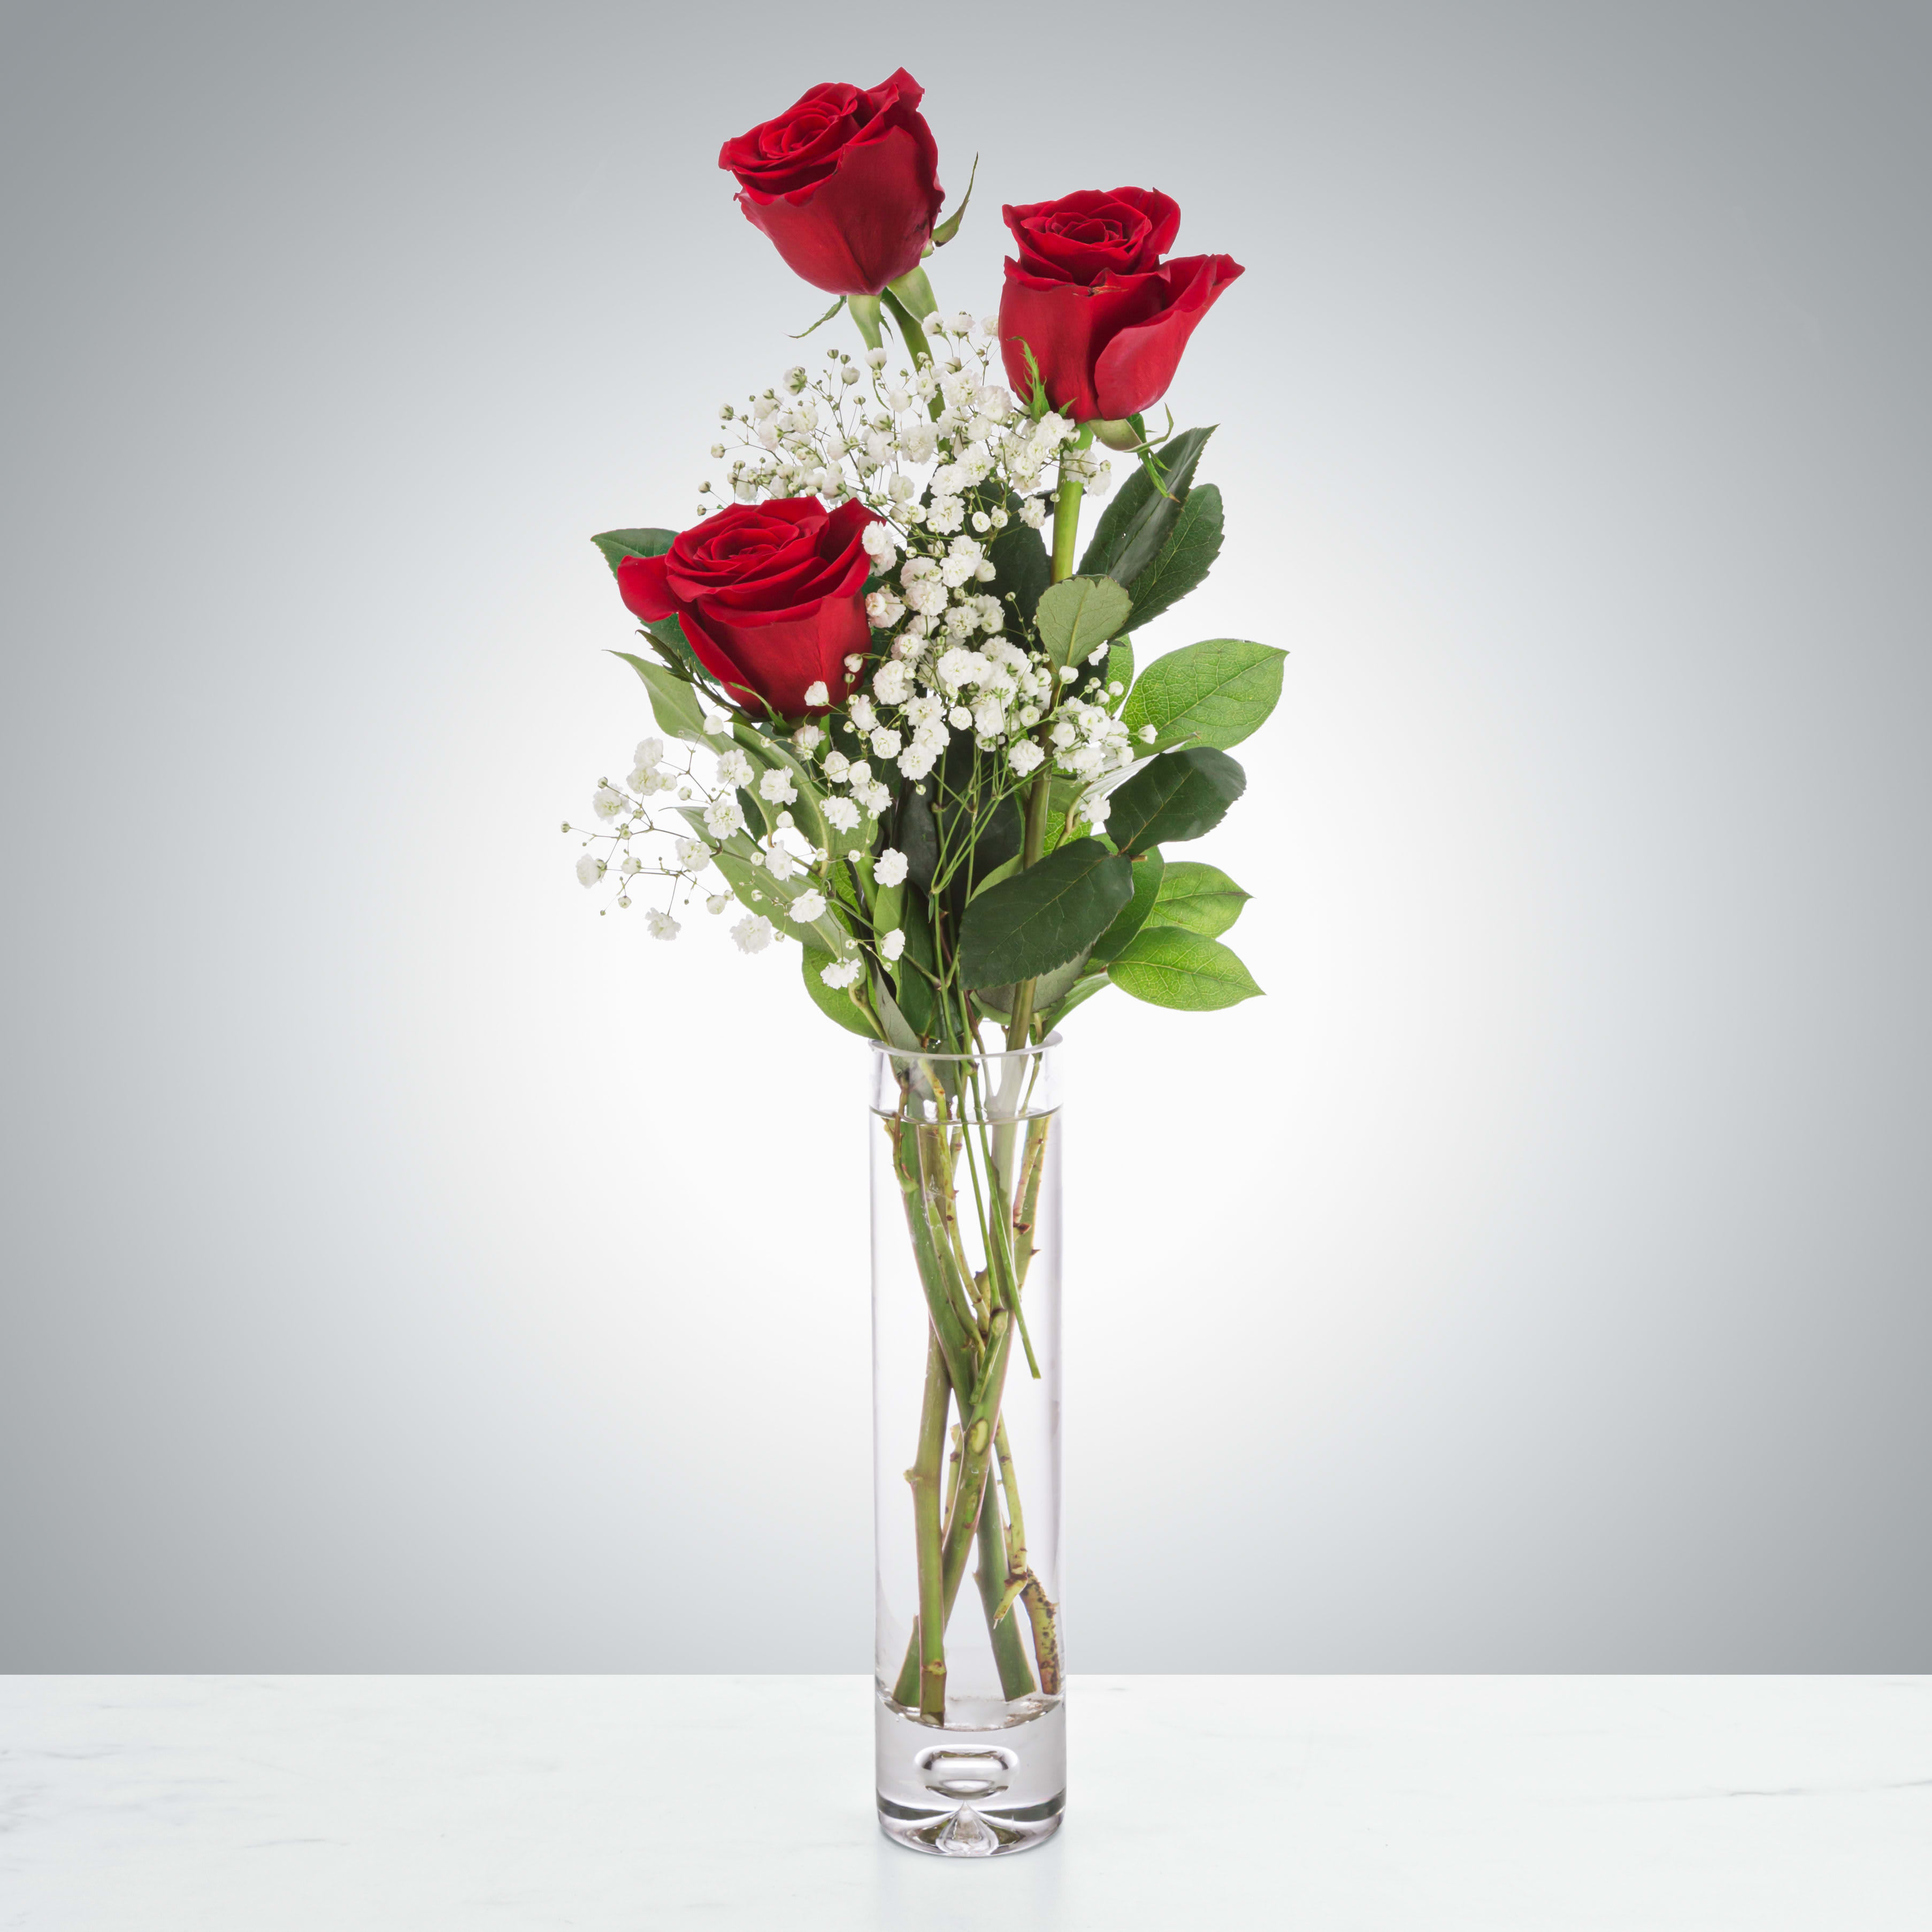 XO by Lv flowers - Send a cute and sweet red rose bud vase to your love, your friend, or your relative for Valentine's day. Sending this arrangement is a lovely gesture and shows that you are thinking of them without breaking the bank!  Approximate Dimensions: 5&quot;D x 15&quot;H